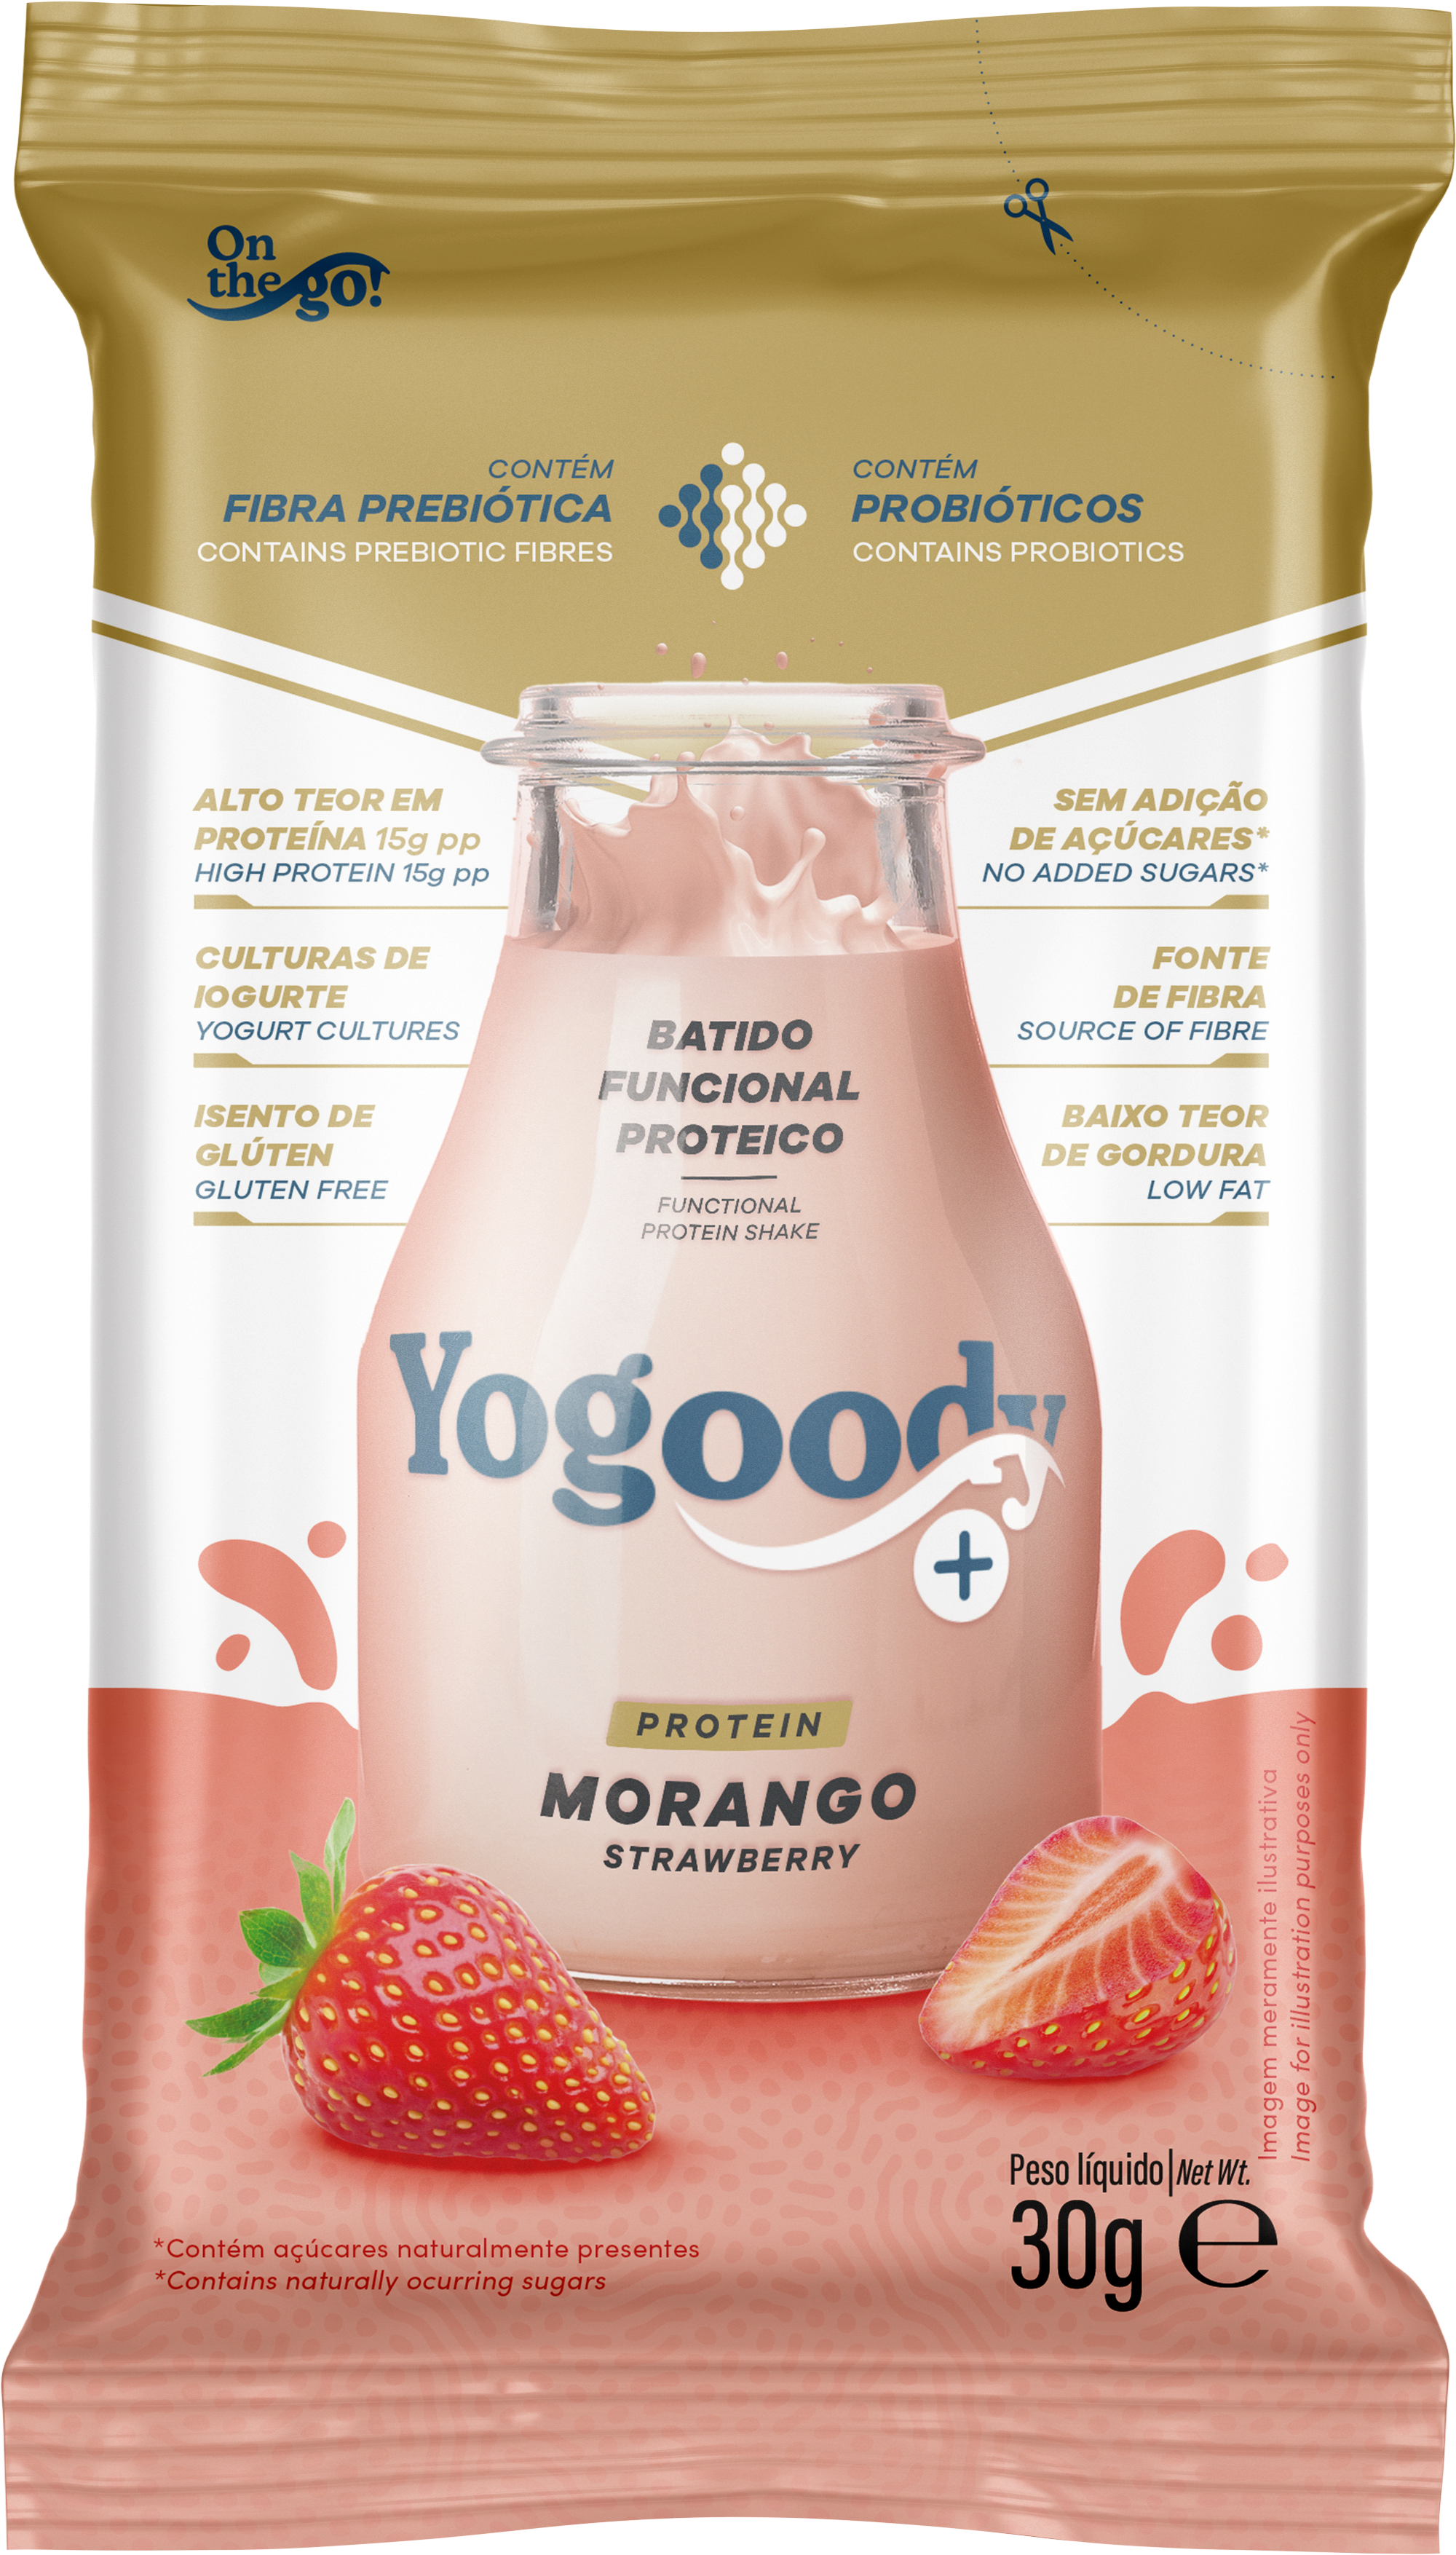 Welcome Pack - Yogoody+ Strawberry and Vanilla Flavoured Shakes (6 x 30g sachets + FREE shaker)